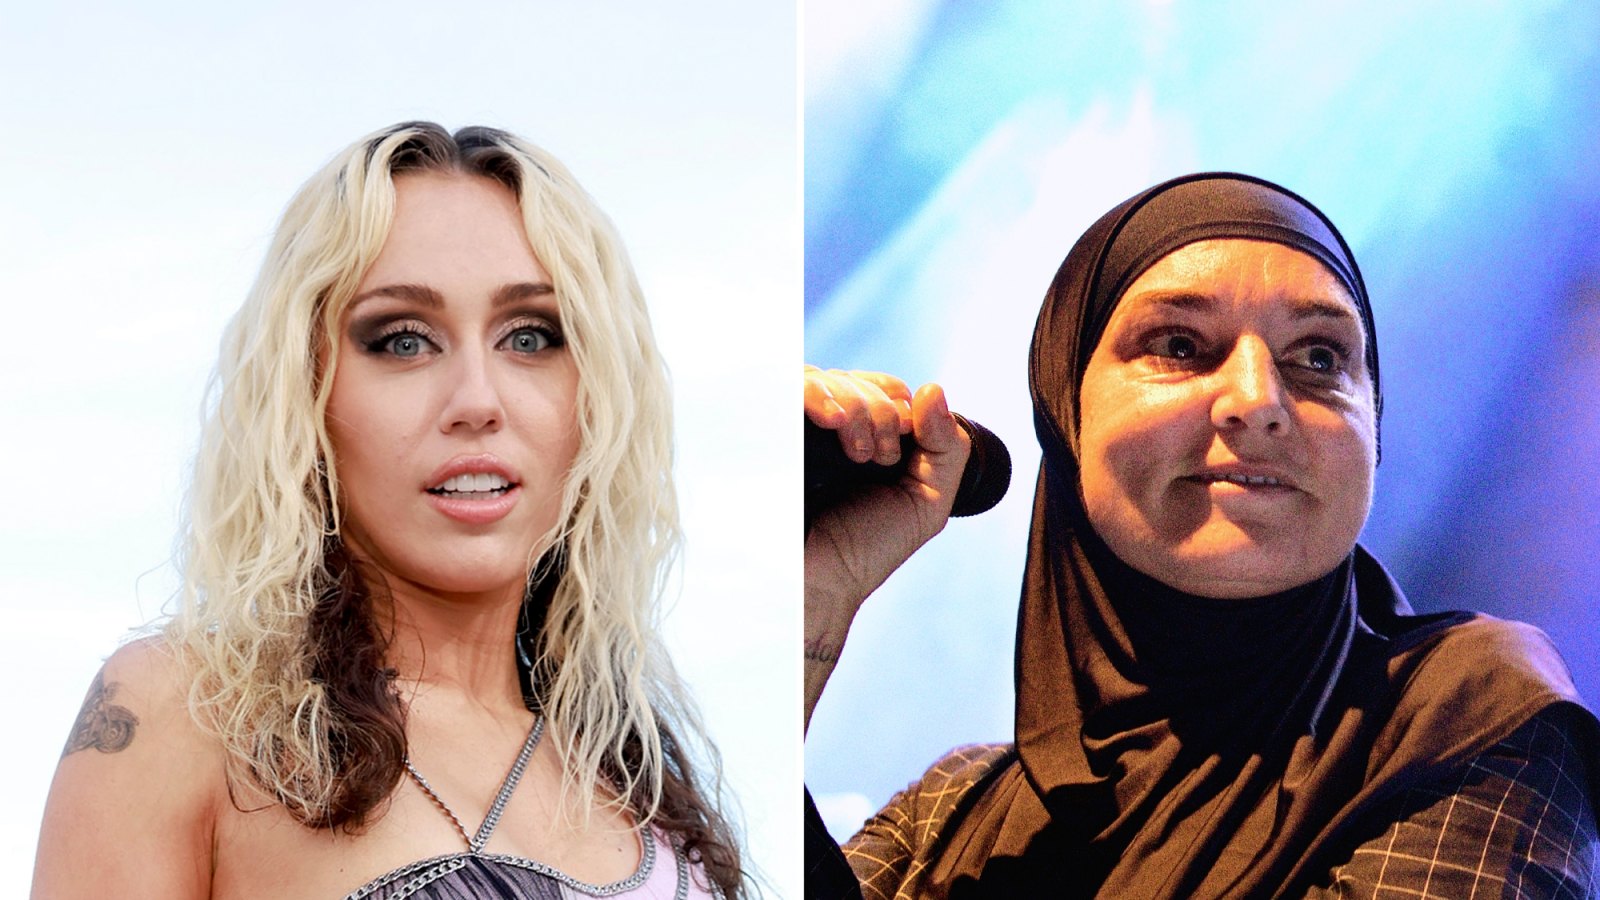 Miley Cyrus Looks Back on Her Feud With Sinead OConnor - And Dedicates a Song in Her Honor